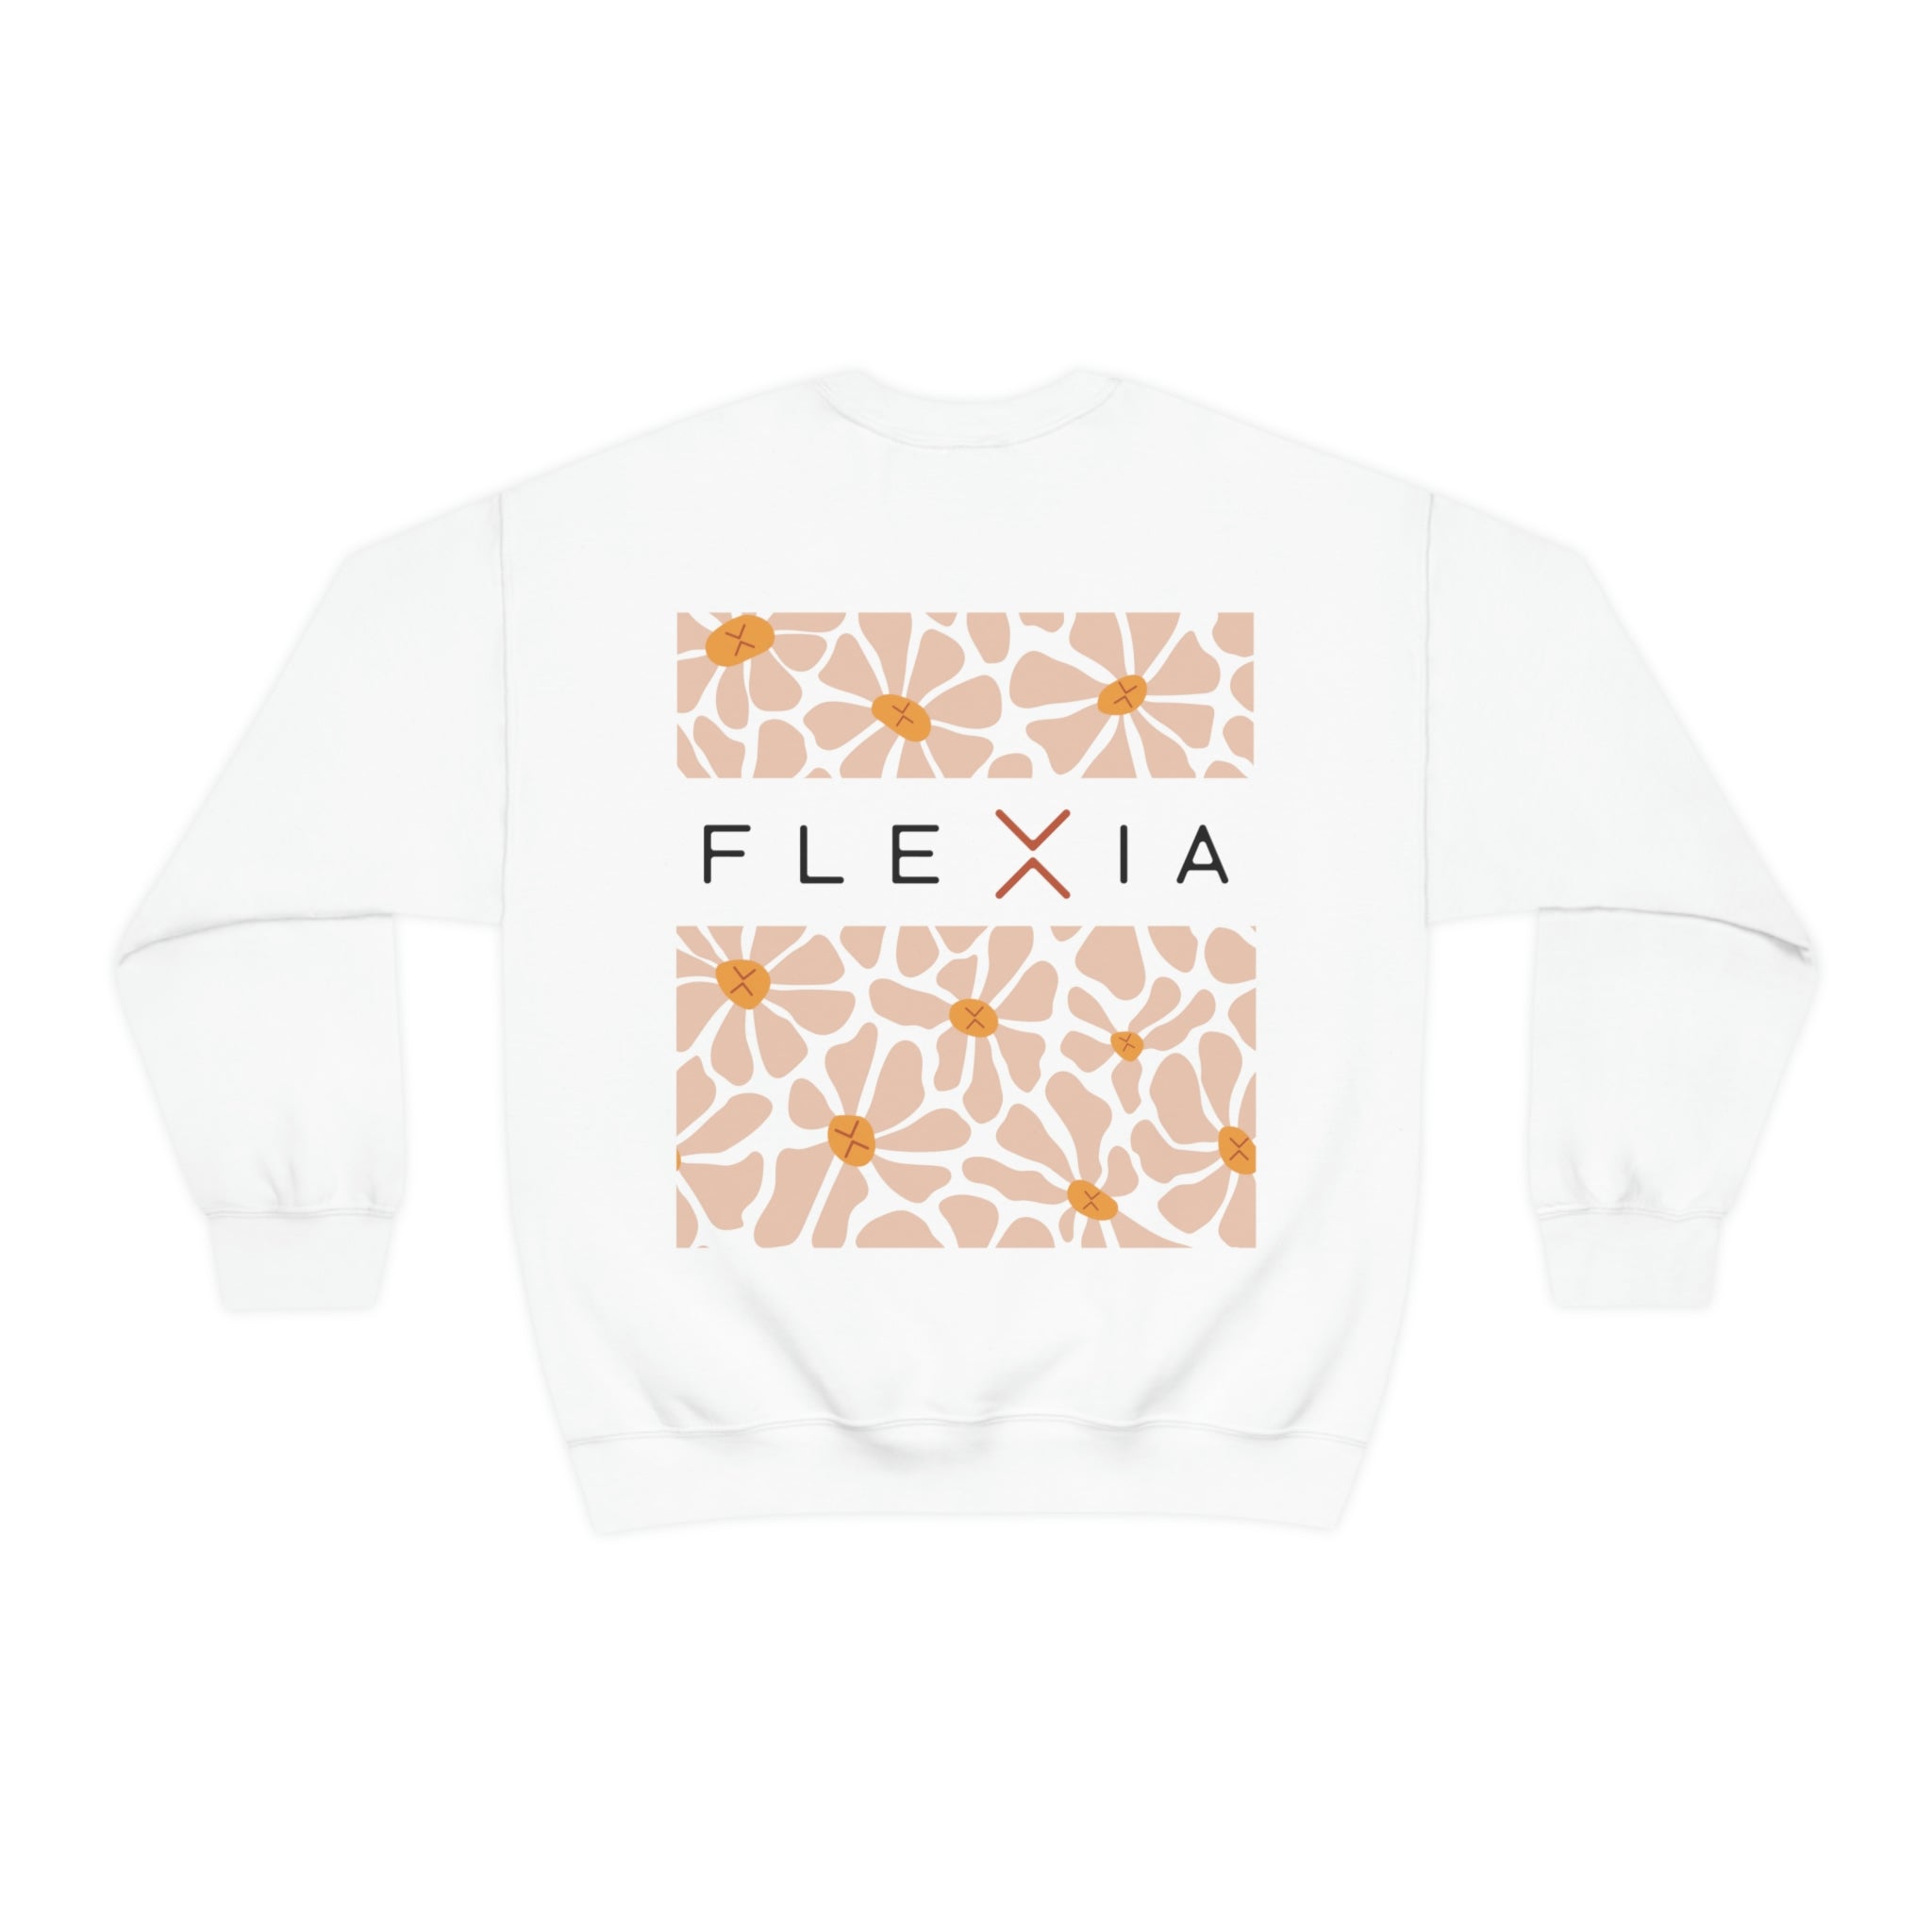 Limited Edition Flexia x Mother's Day "BEING A MOM..."